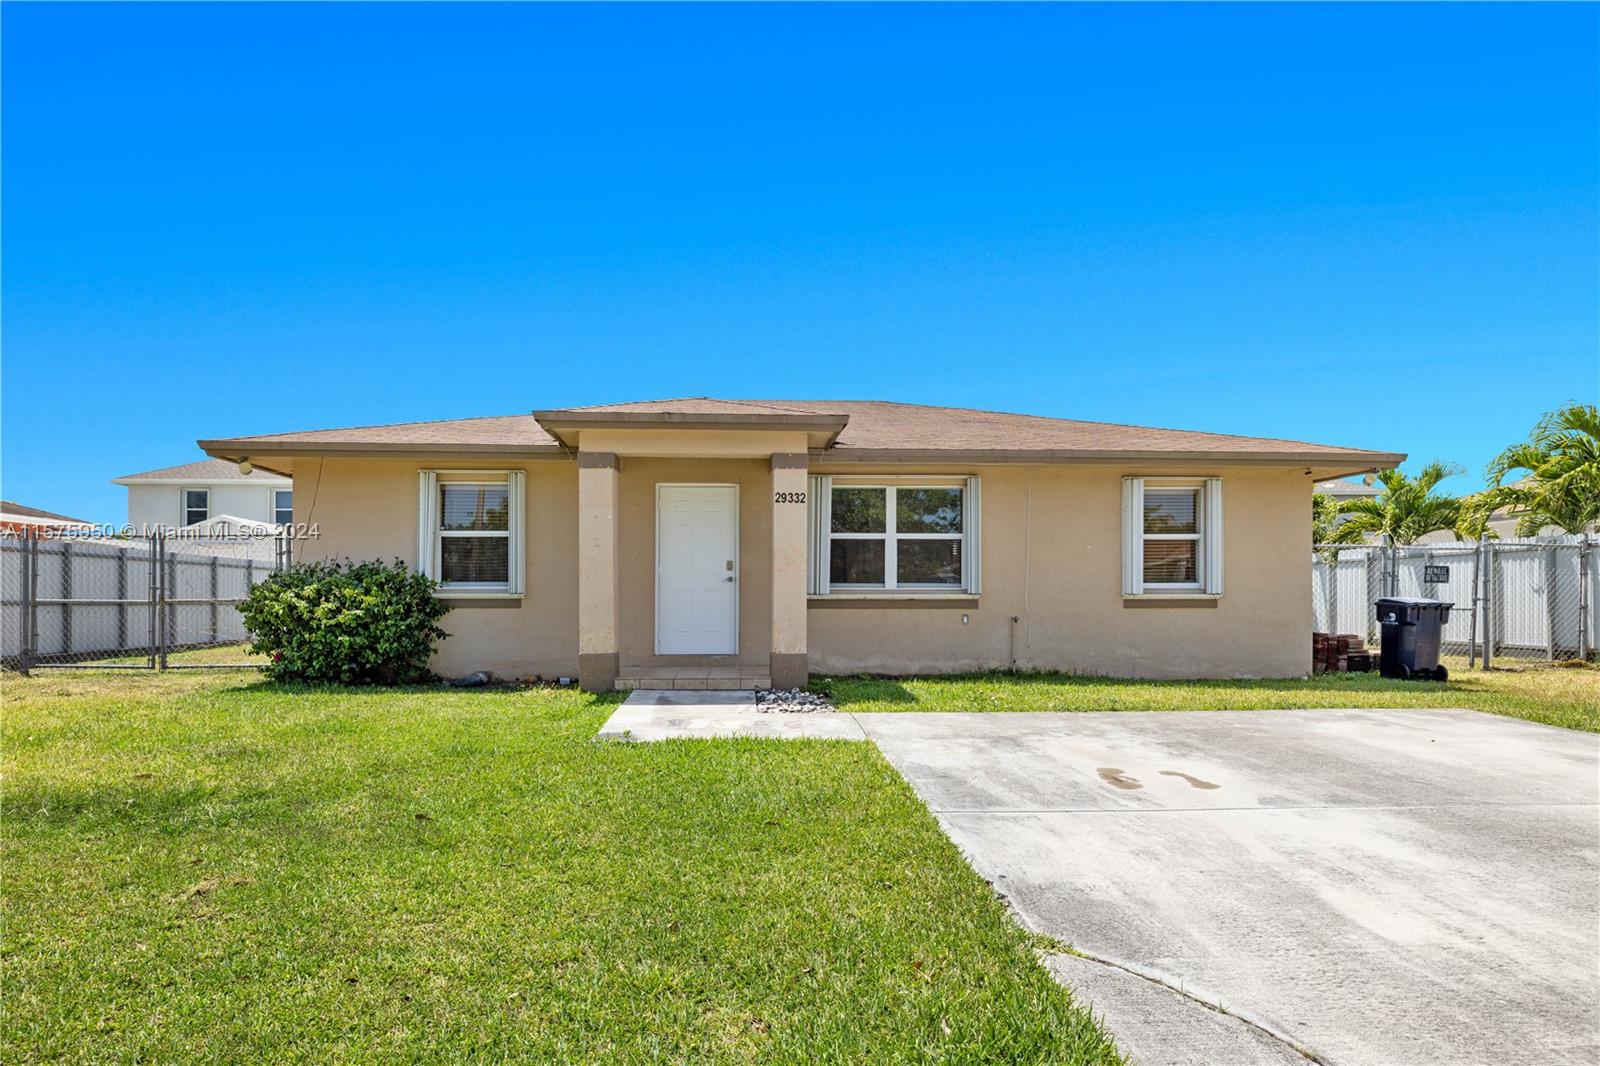 Great starter home that consists of 3 Bed 2 Bath in Homestead. This property features an open kitchen, ceramic floors throughout, 2 year old A/C, accordion shutters and an ample backyard with a shed. This property is conveniently located close to great shopping, plenty of dining options, and the FL-Turnpike.